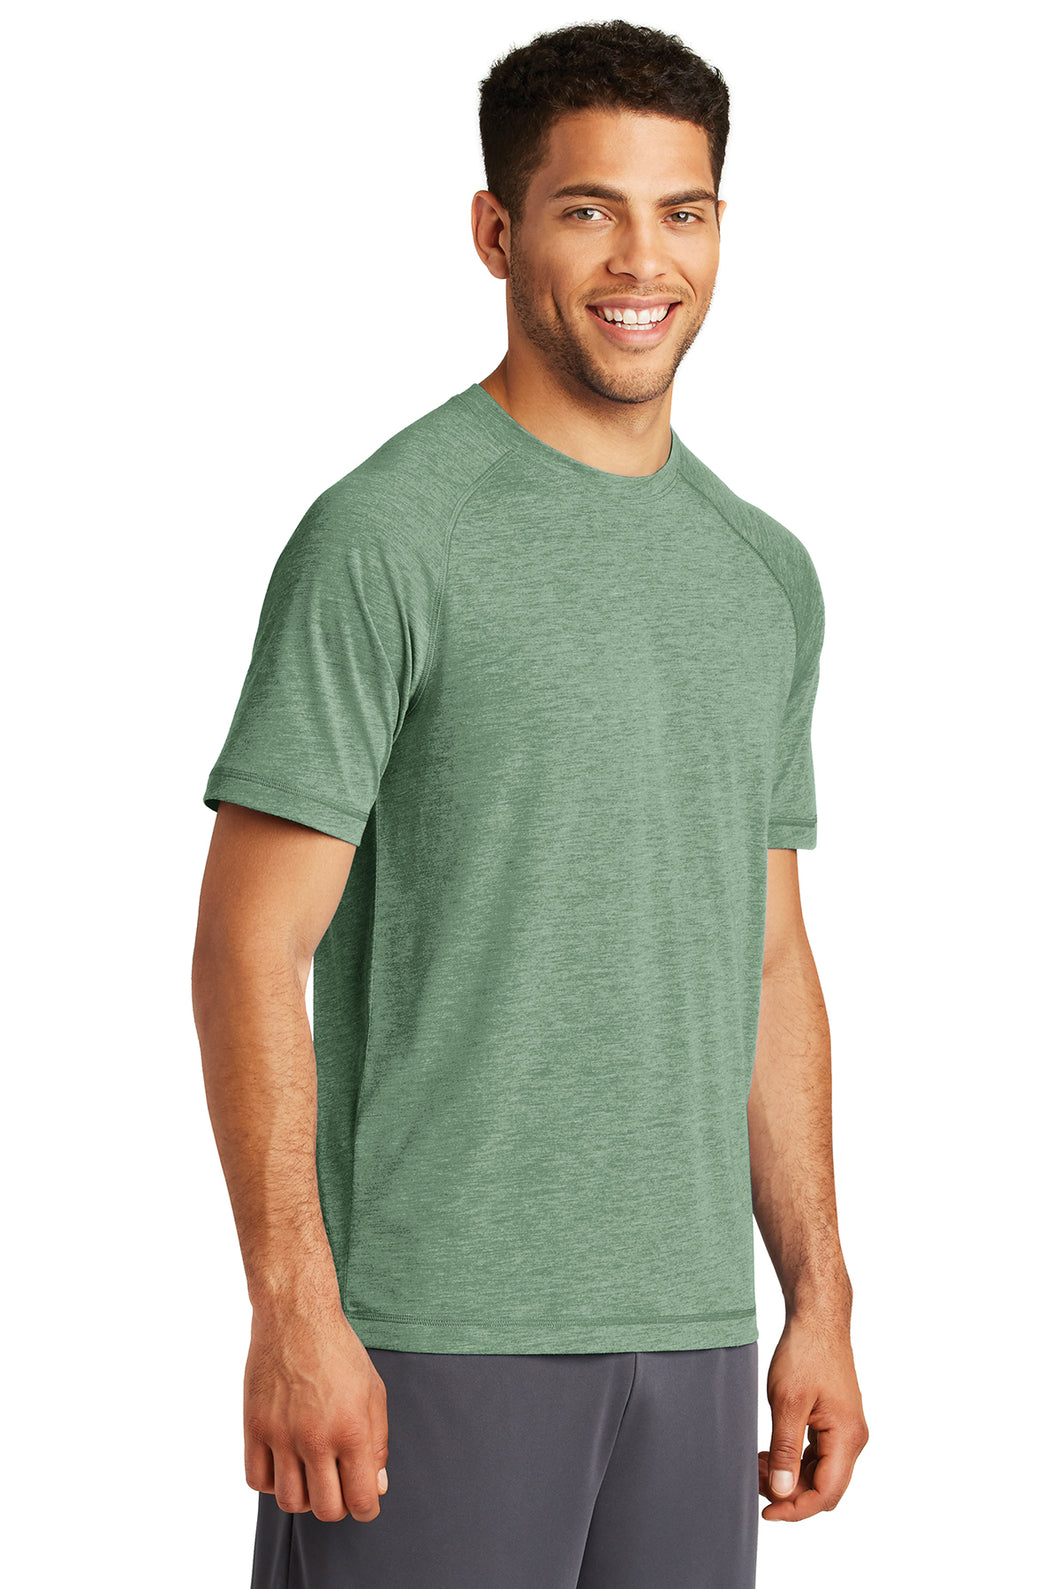 Fusion Performance Top - Green